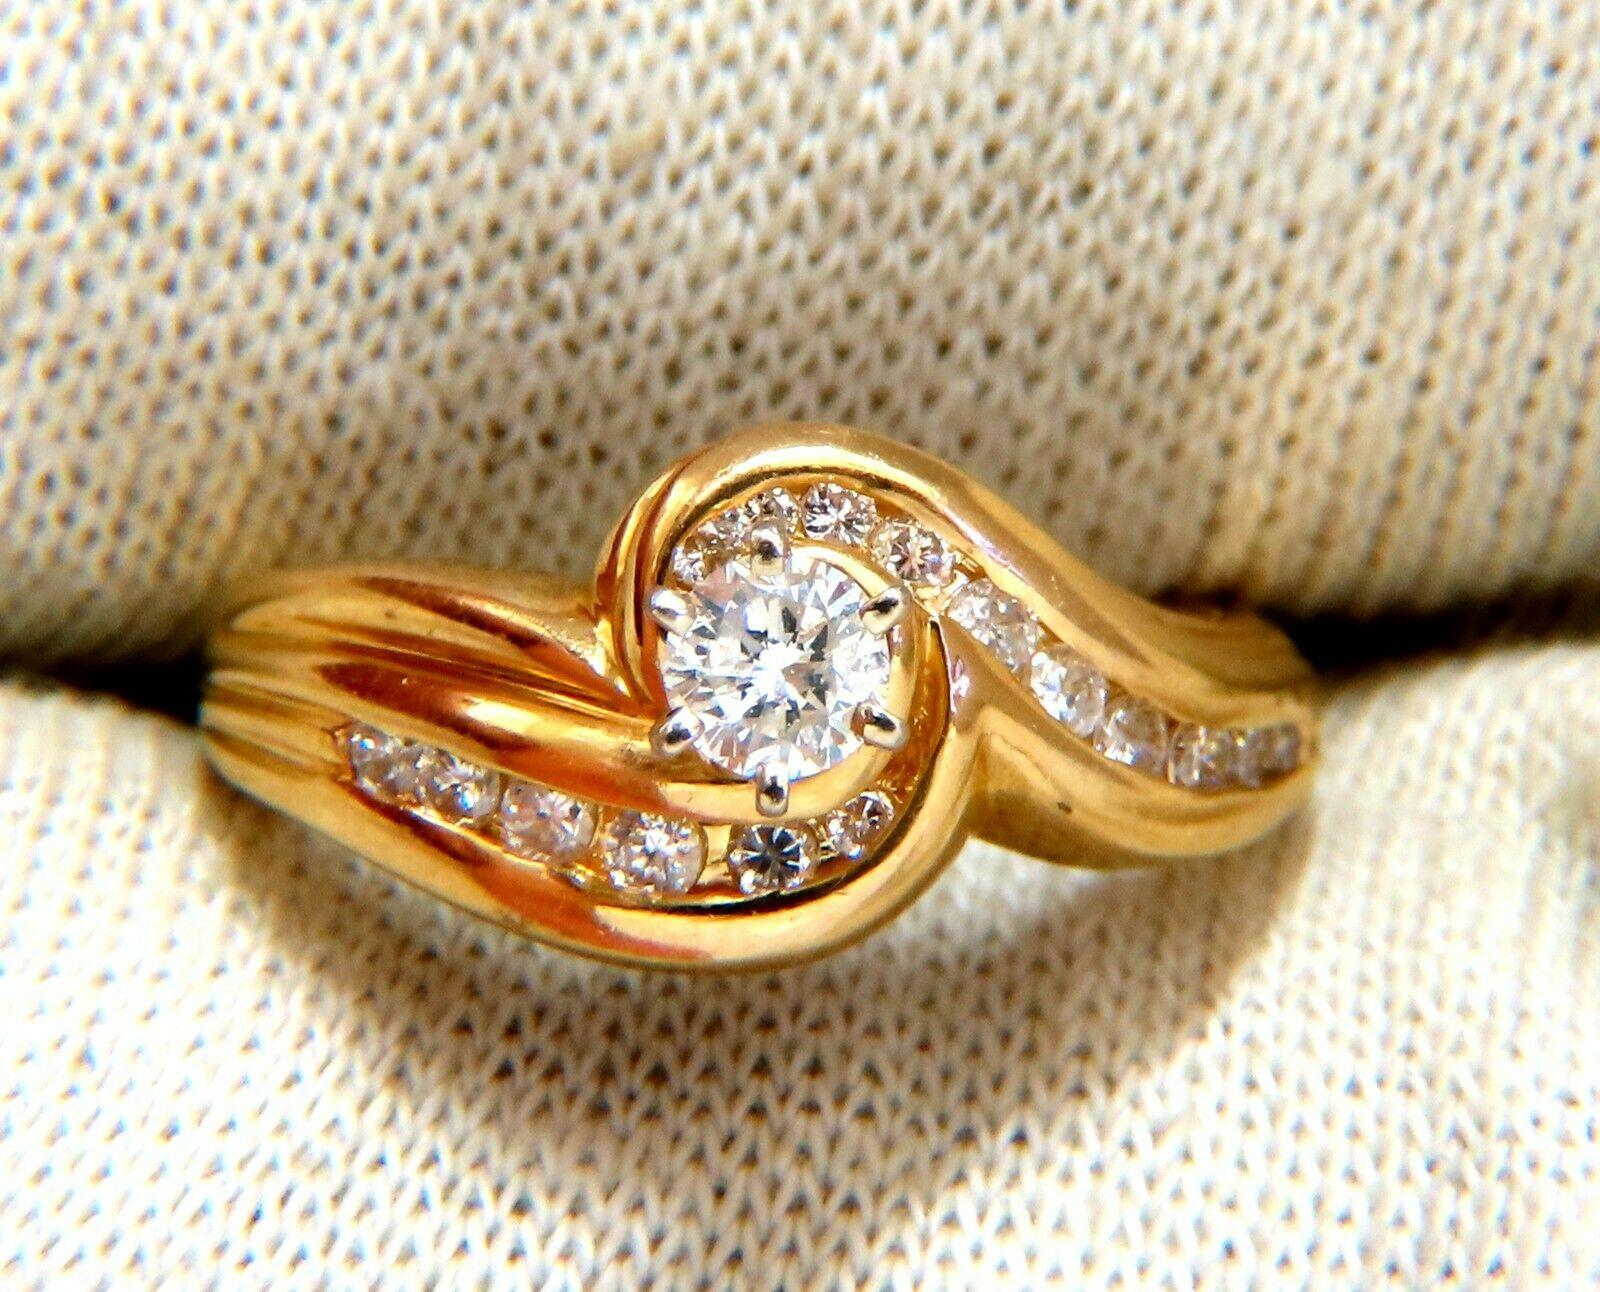 Vintage Solitaire & Band

.24ct Natural Round Diamond Center &

.28ct Natural Round Cut Accent Diamonds. 

Si-1 clarity H color.

14kt yellow gold

7.2 Grams

Overall ring: 9.5mm wide

Depth: 7.7mm

Band: 3mm wide 

2.7mm depth

Current ring size: